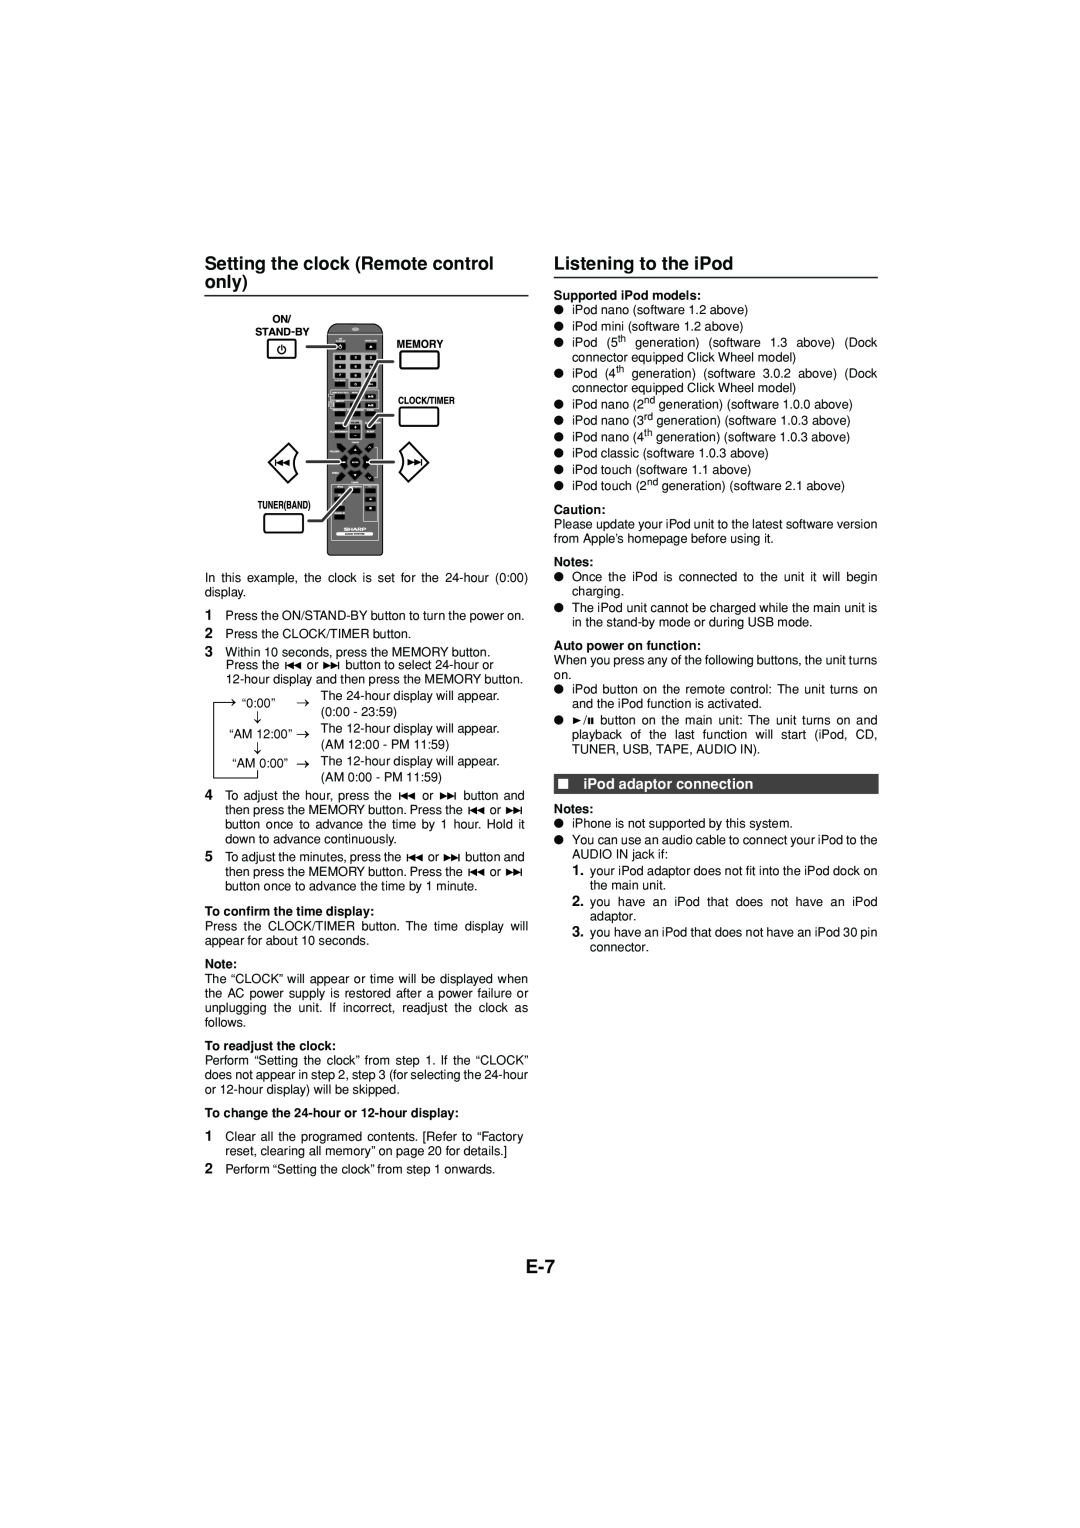 Sony CD-DH790N operation manual Setting the clock Remote control only, Listening to the iPod, iPod adaptor connection 